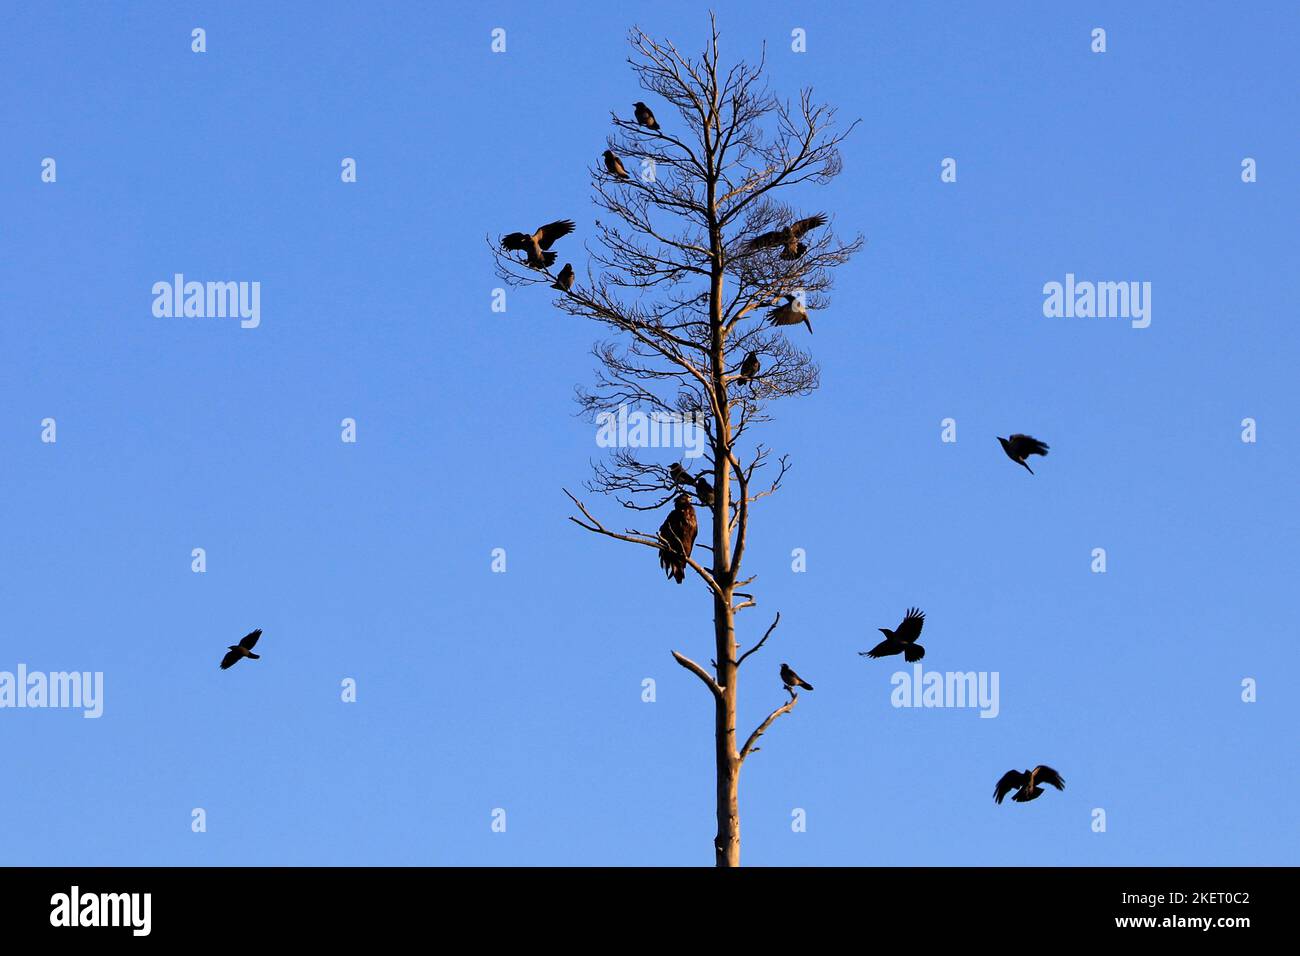 Golden eagle, Aquila chrysaetos, perched on a snag or dead tree. Hooded crows, corvus cornix are trying to crowd out the large bird. Finland, 2022. Stock Photo